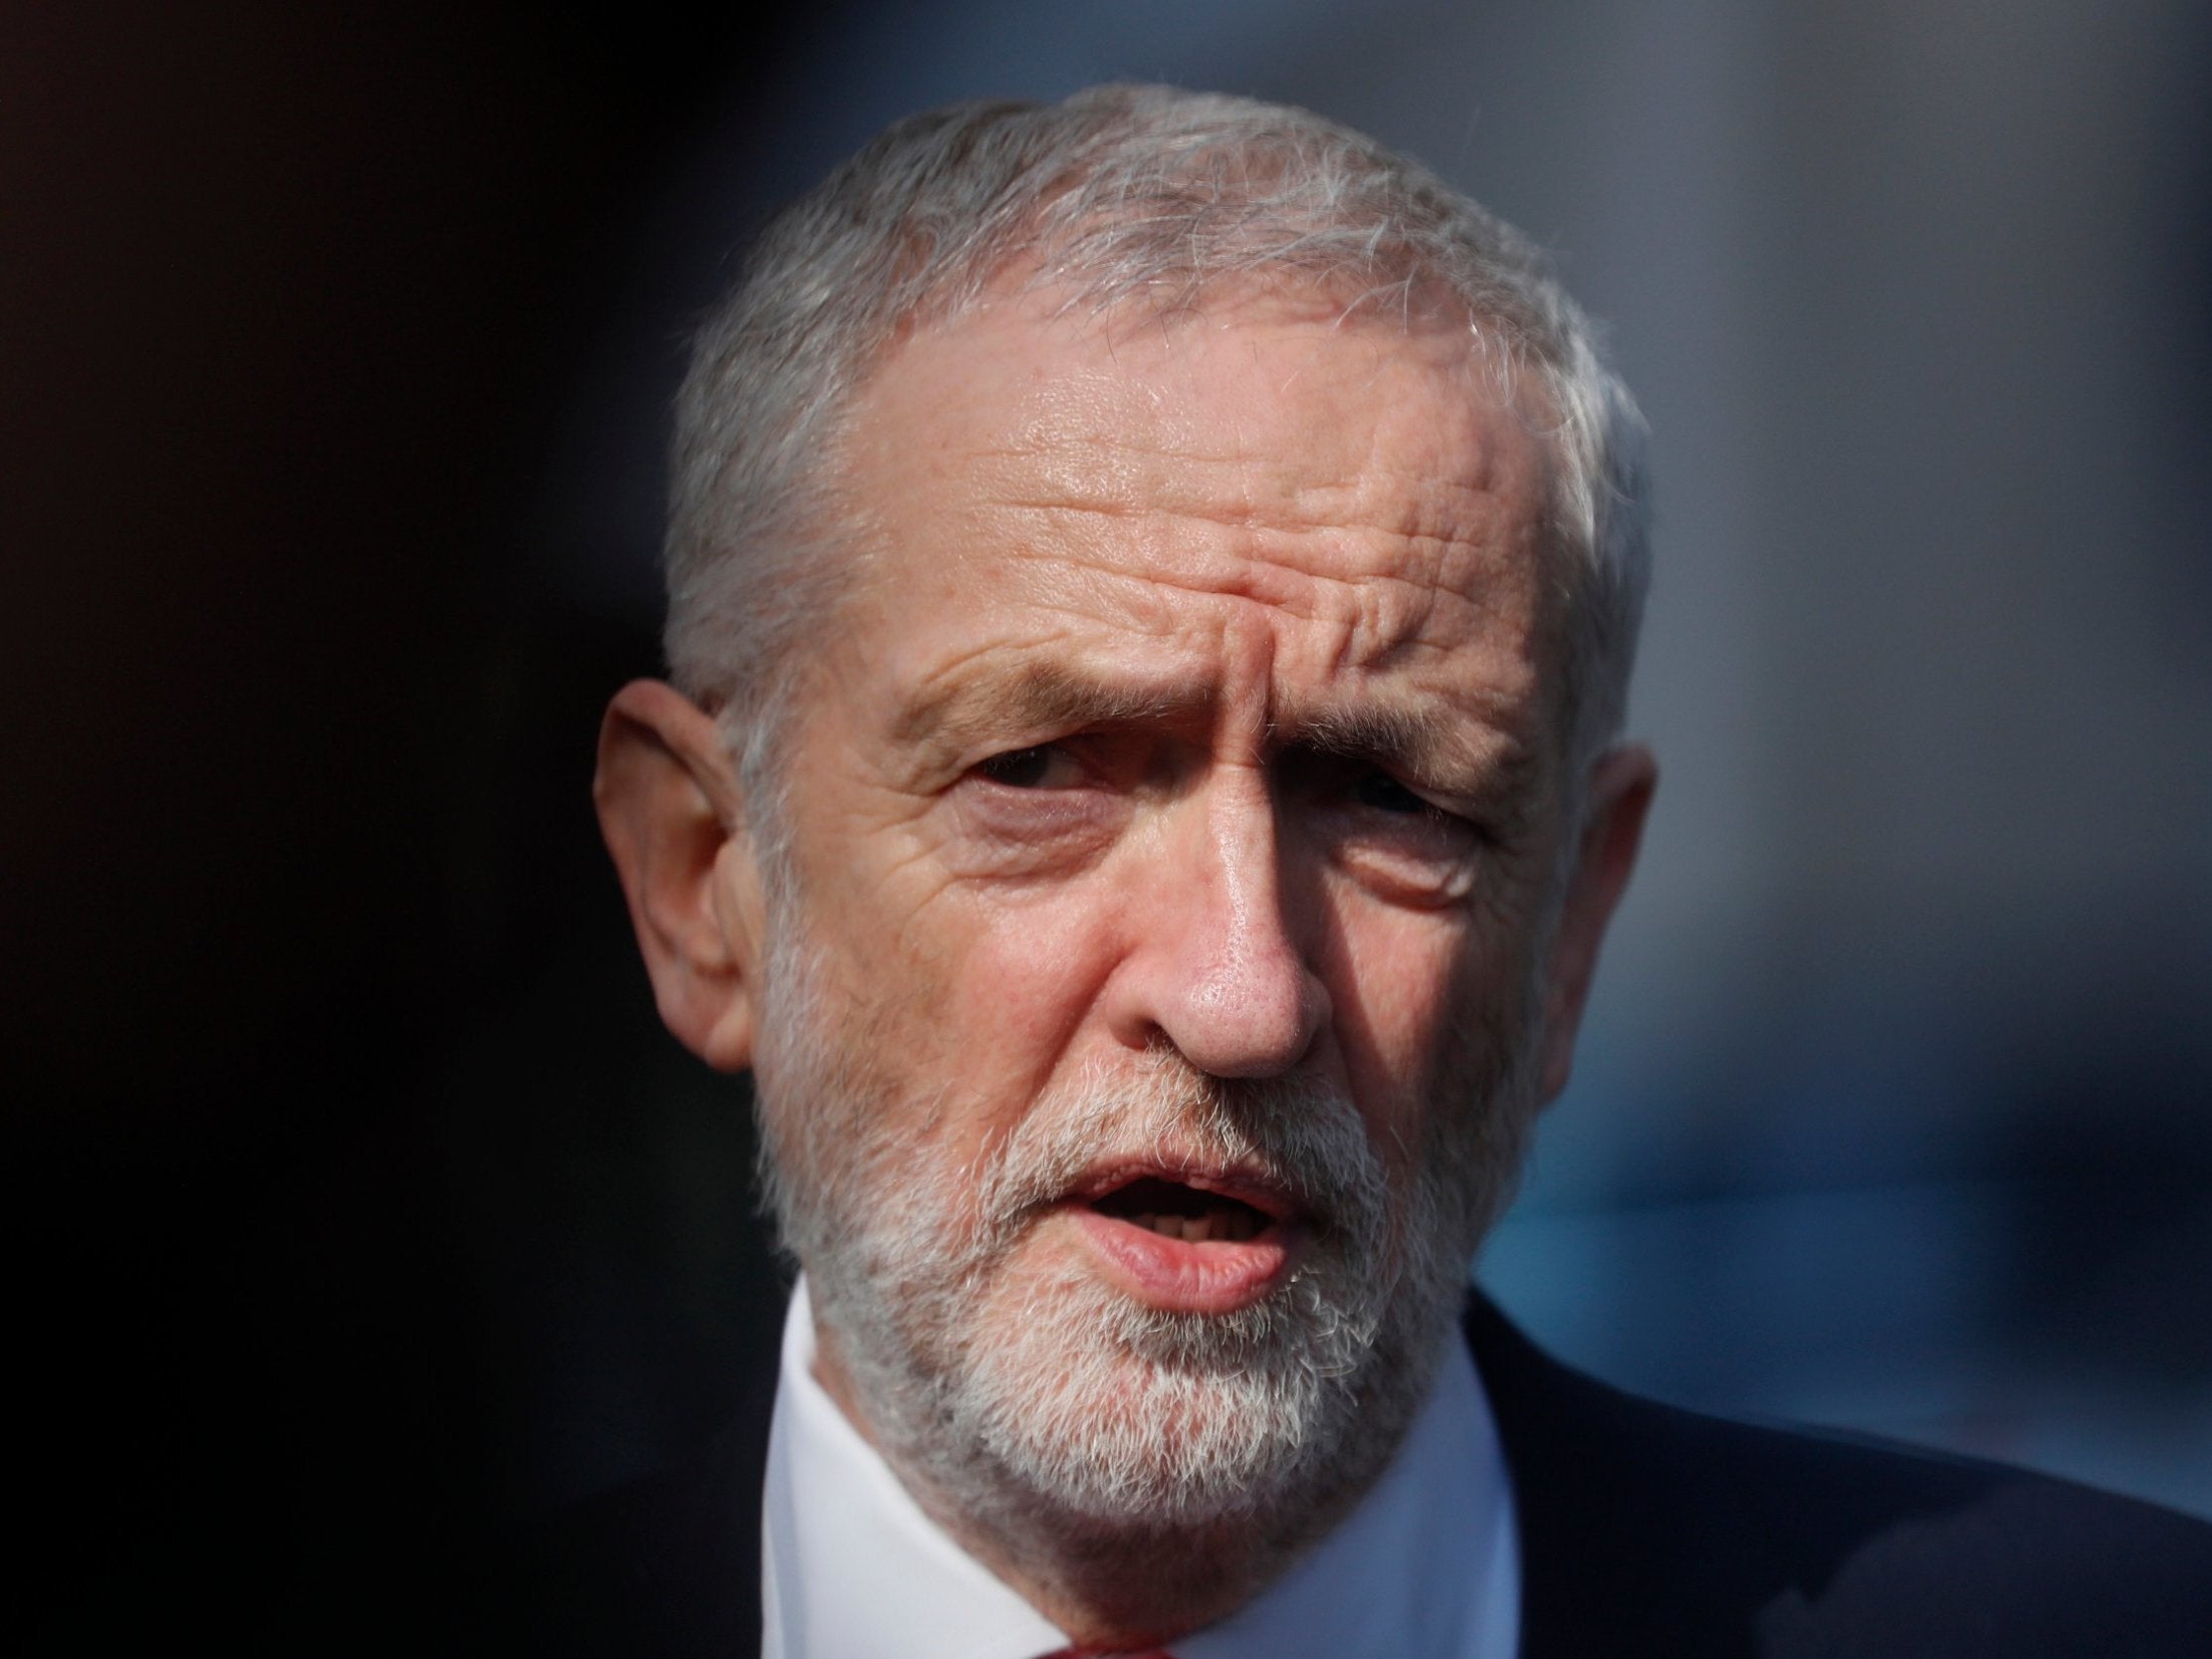 Brexit: Jeremy Corbyn warned 'demoralised' Labour voters will boycott elections after second referendum fudge